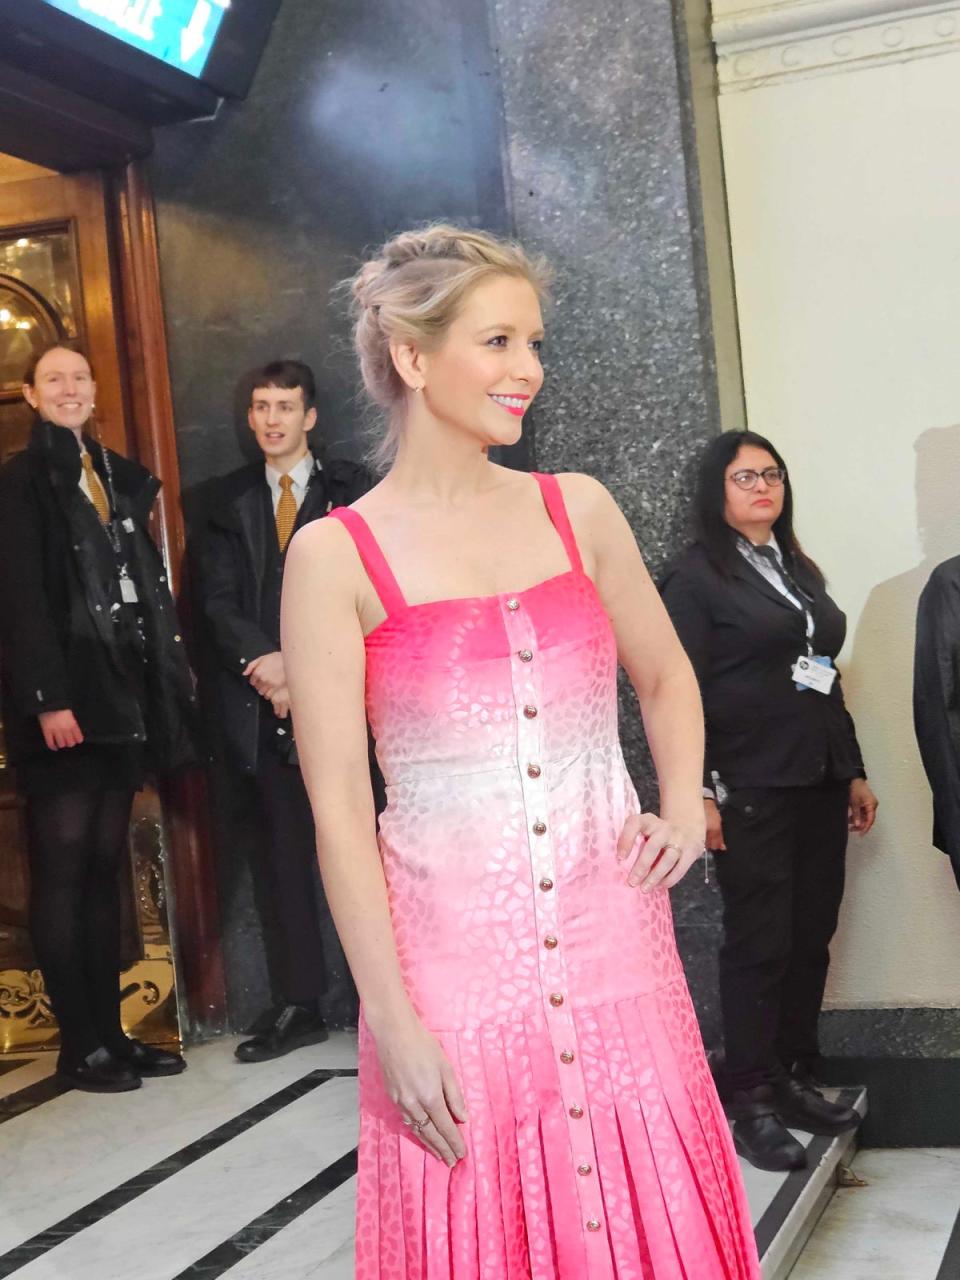 Countdown star Rachel Riley stepped out for the star-studded event (Tina Campbell/Evening Standard)